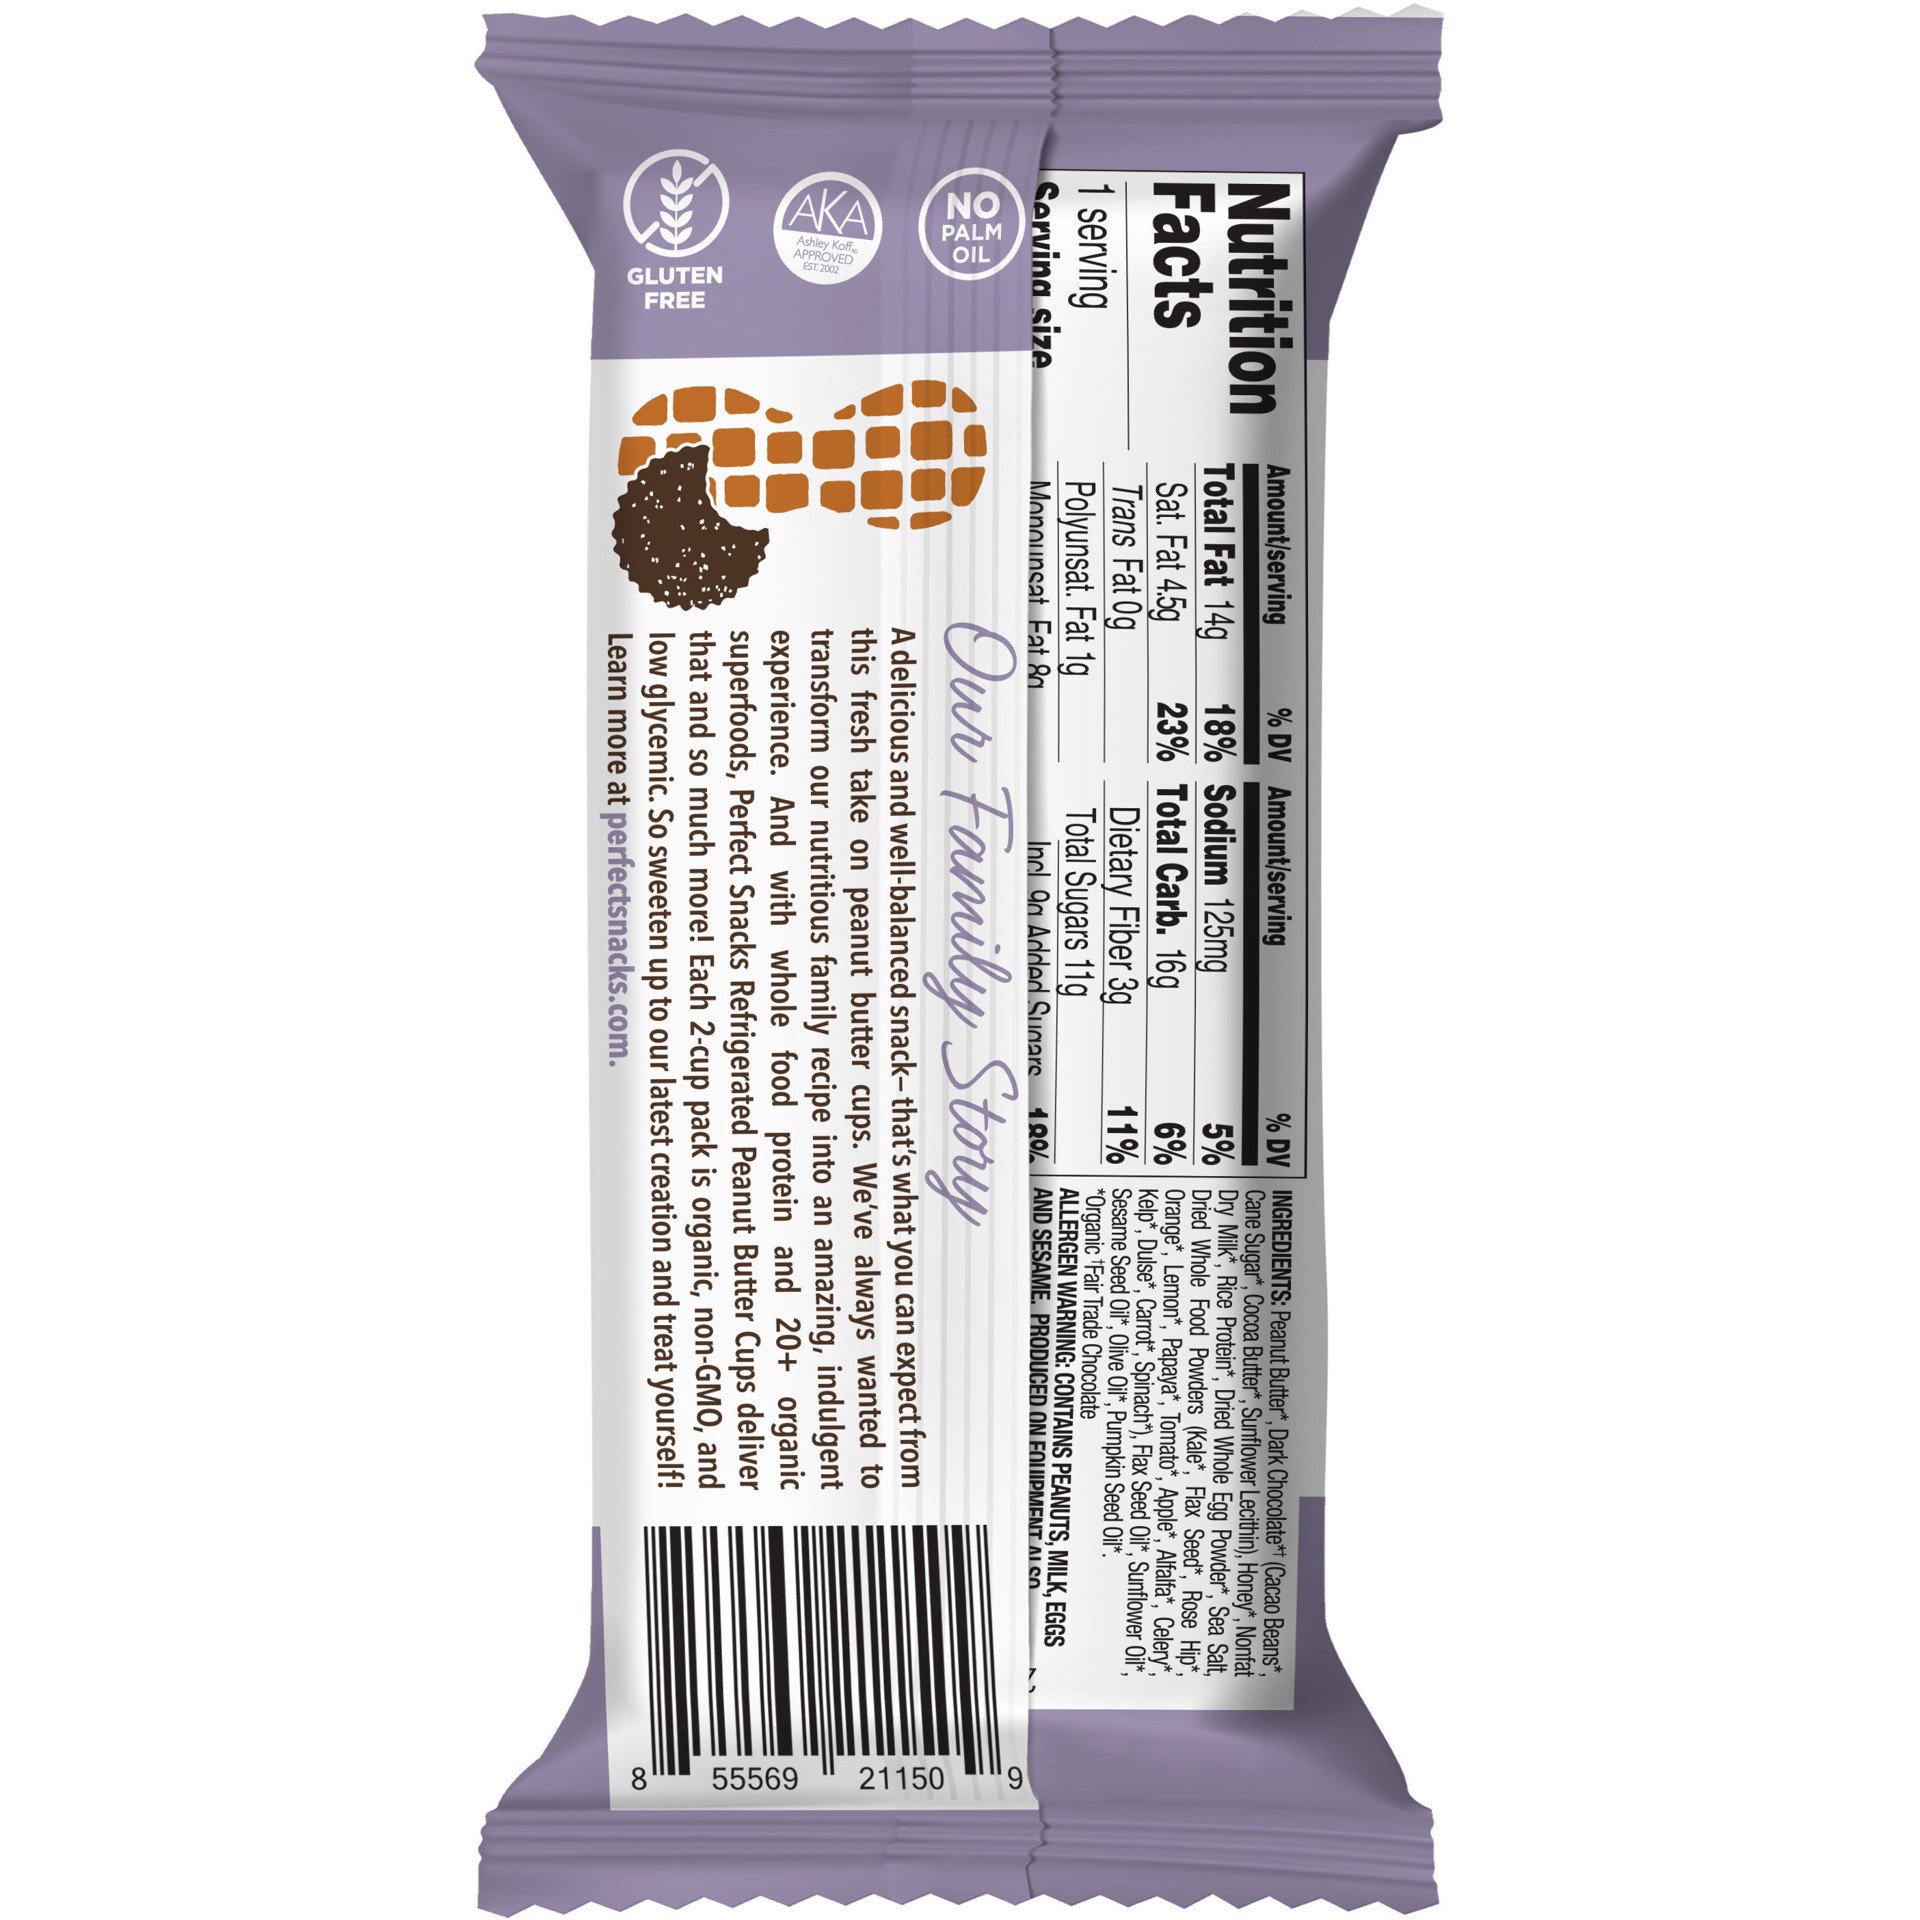 slide 5 of 19, Perfect Snacks Refrigerated Peanut Butter Cups, Dark Chocolate with Sea Salt, 1.4 Ounce Cups, 1.4 oz